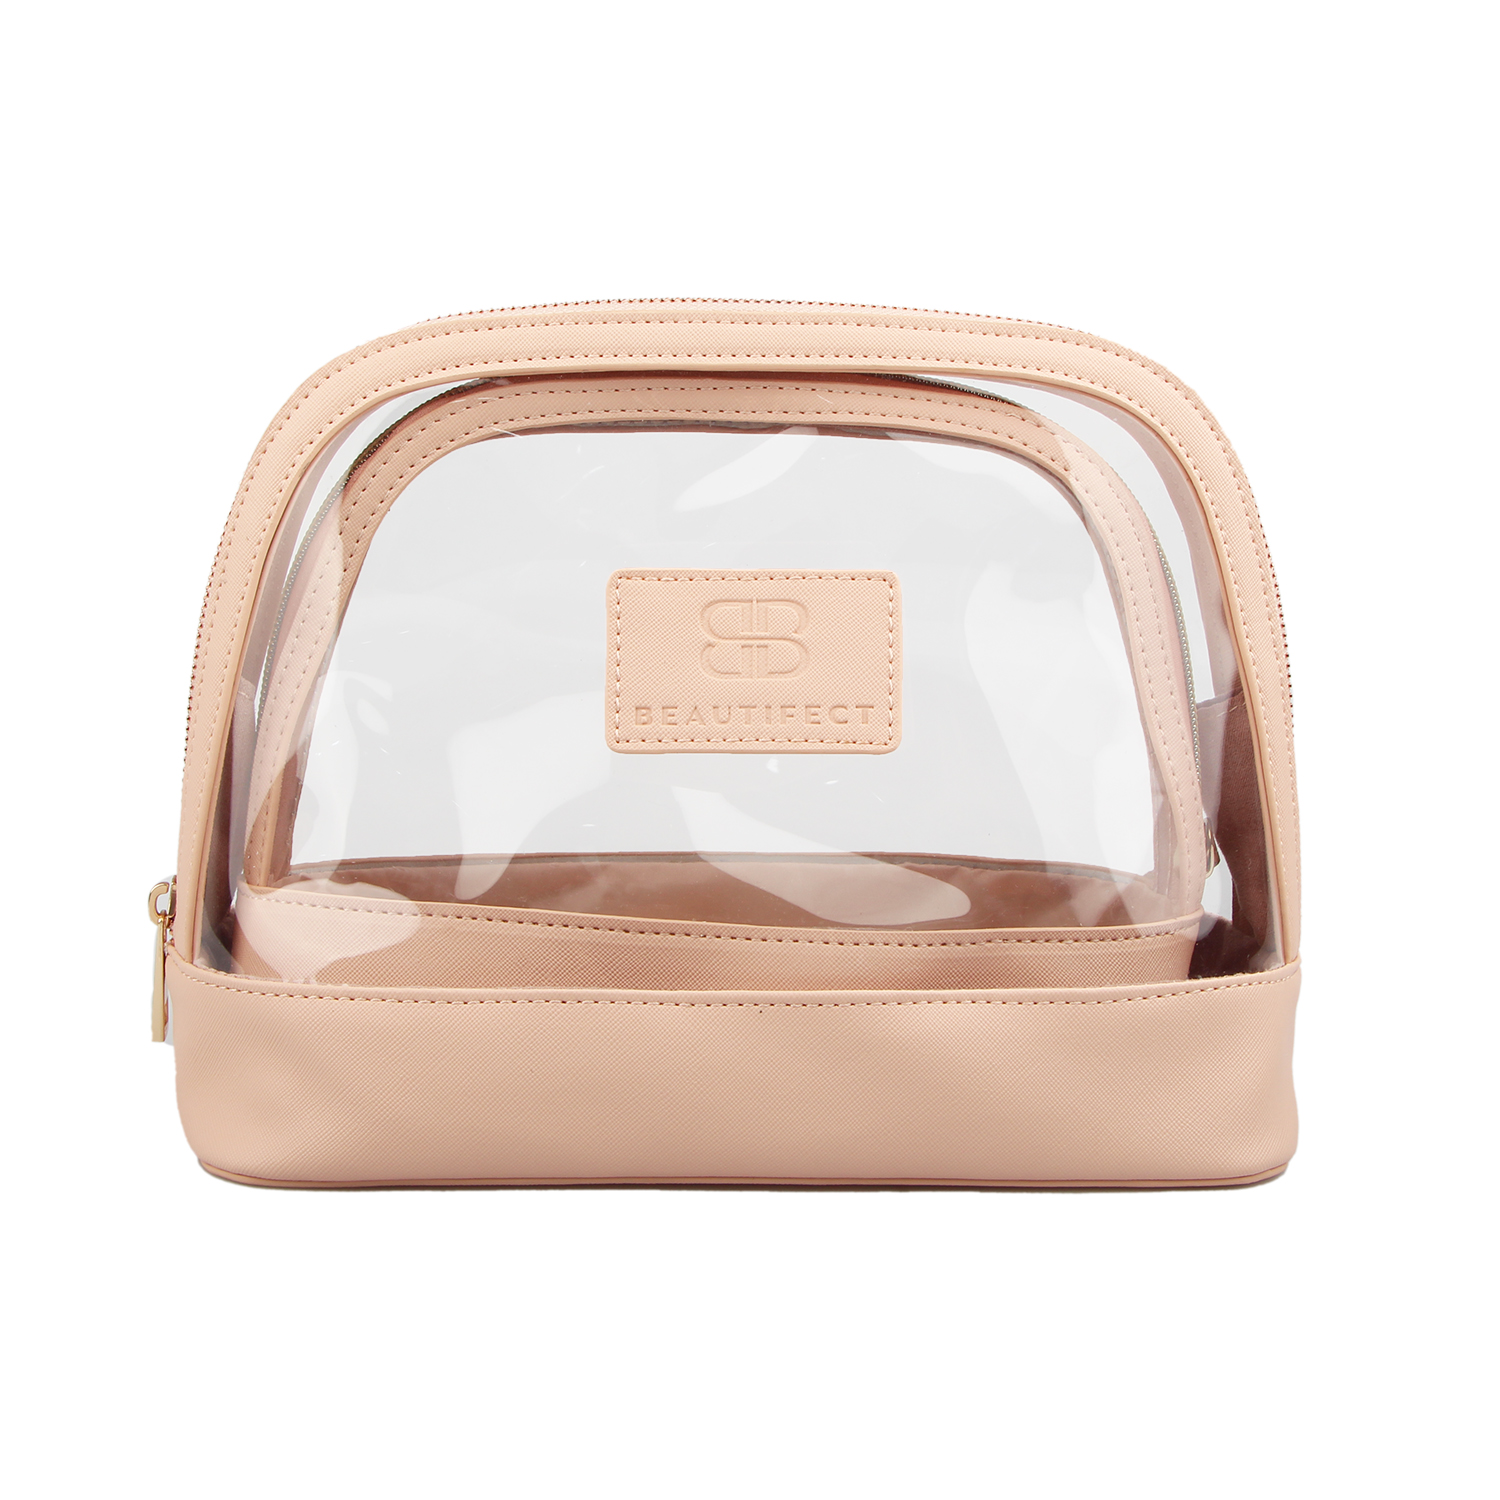 Makeup Pouch Transparent Clear PVC Cosmetic Bag Set for lady Clear Makeup Bags Women – Transparent Cosmetic Travel Bags, Clear PVC Makeup Bag Organizer, Toiletry Bags for Traveling Girls, Wat...